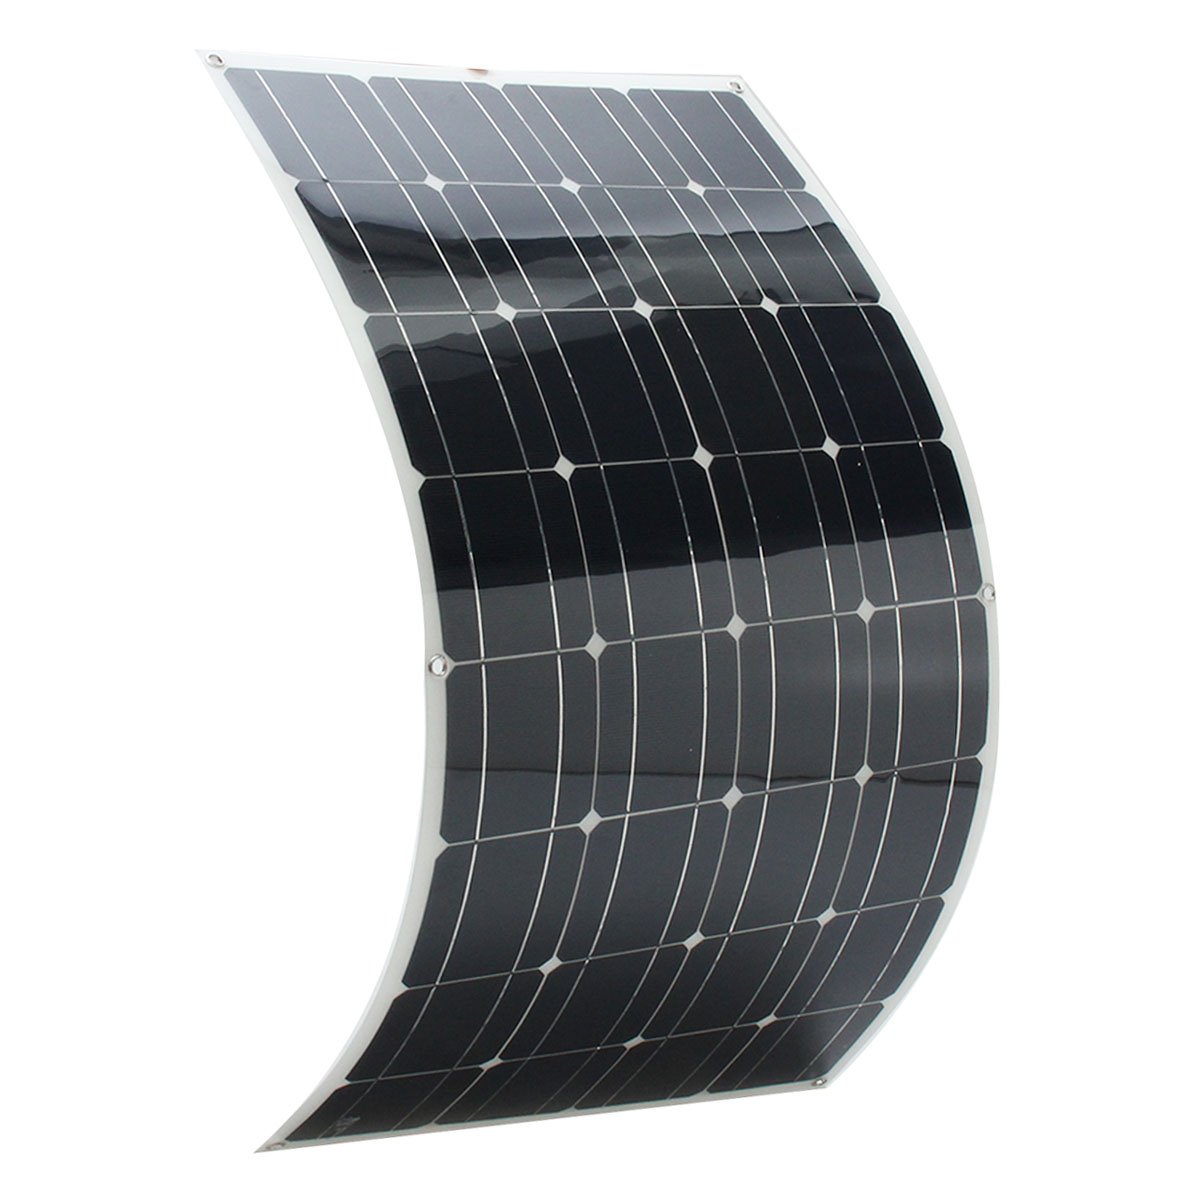 Elfeland® SP-38 18V 100W 1050x540x2.5mm Flexible Solar Panel With 1.5m Cable 1